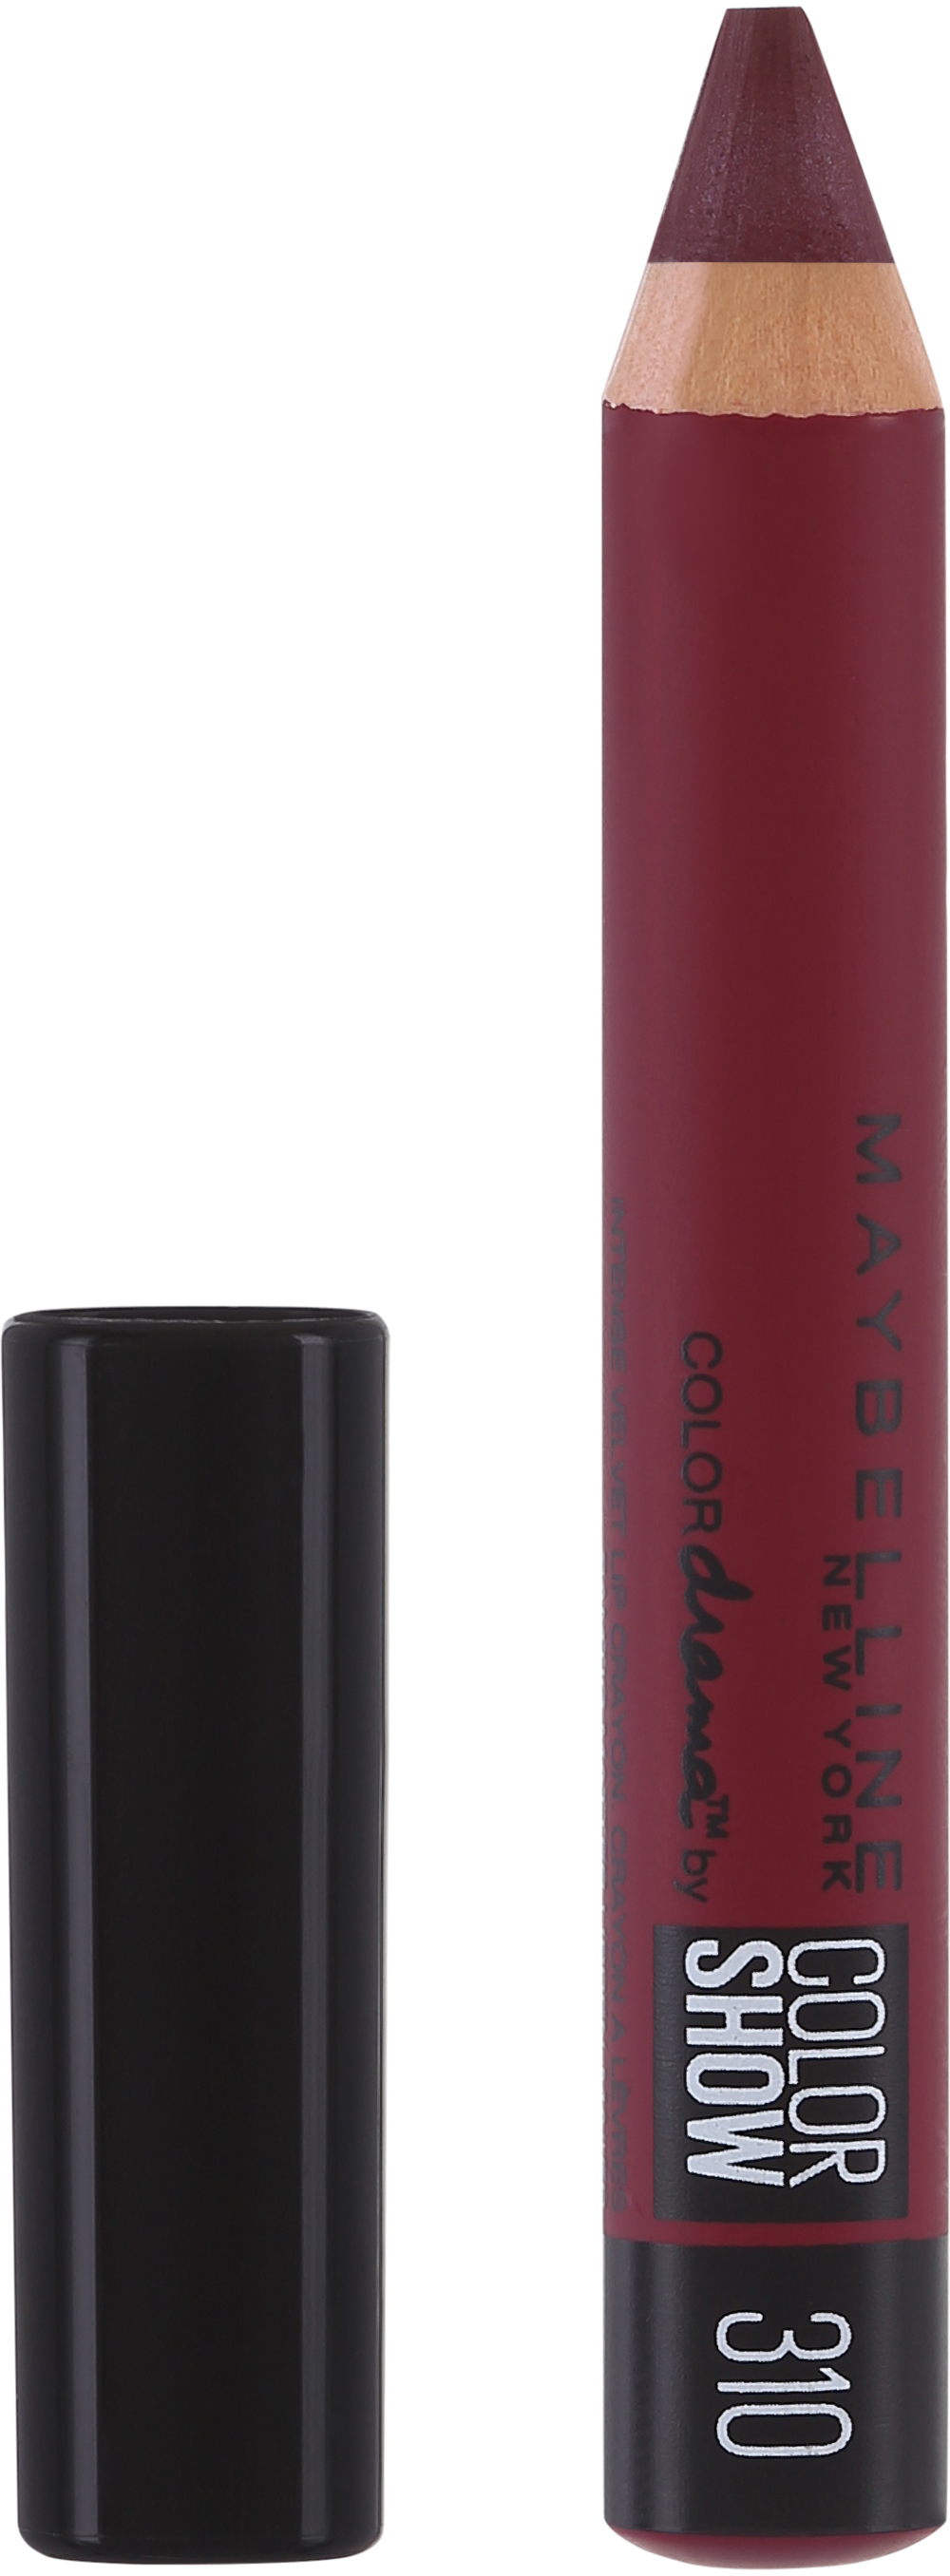 Maybelline Color Drama Lips 310 Berry Much